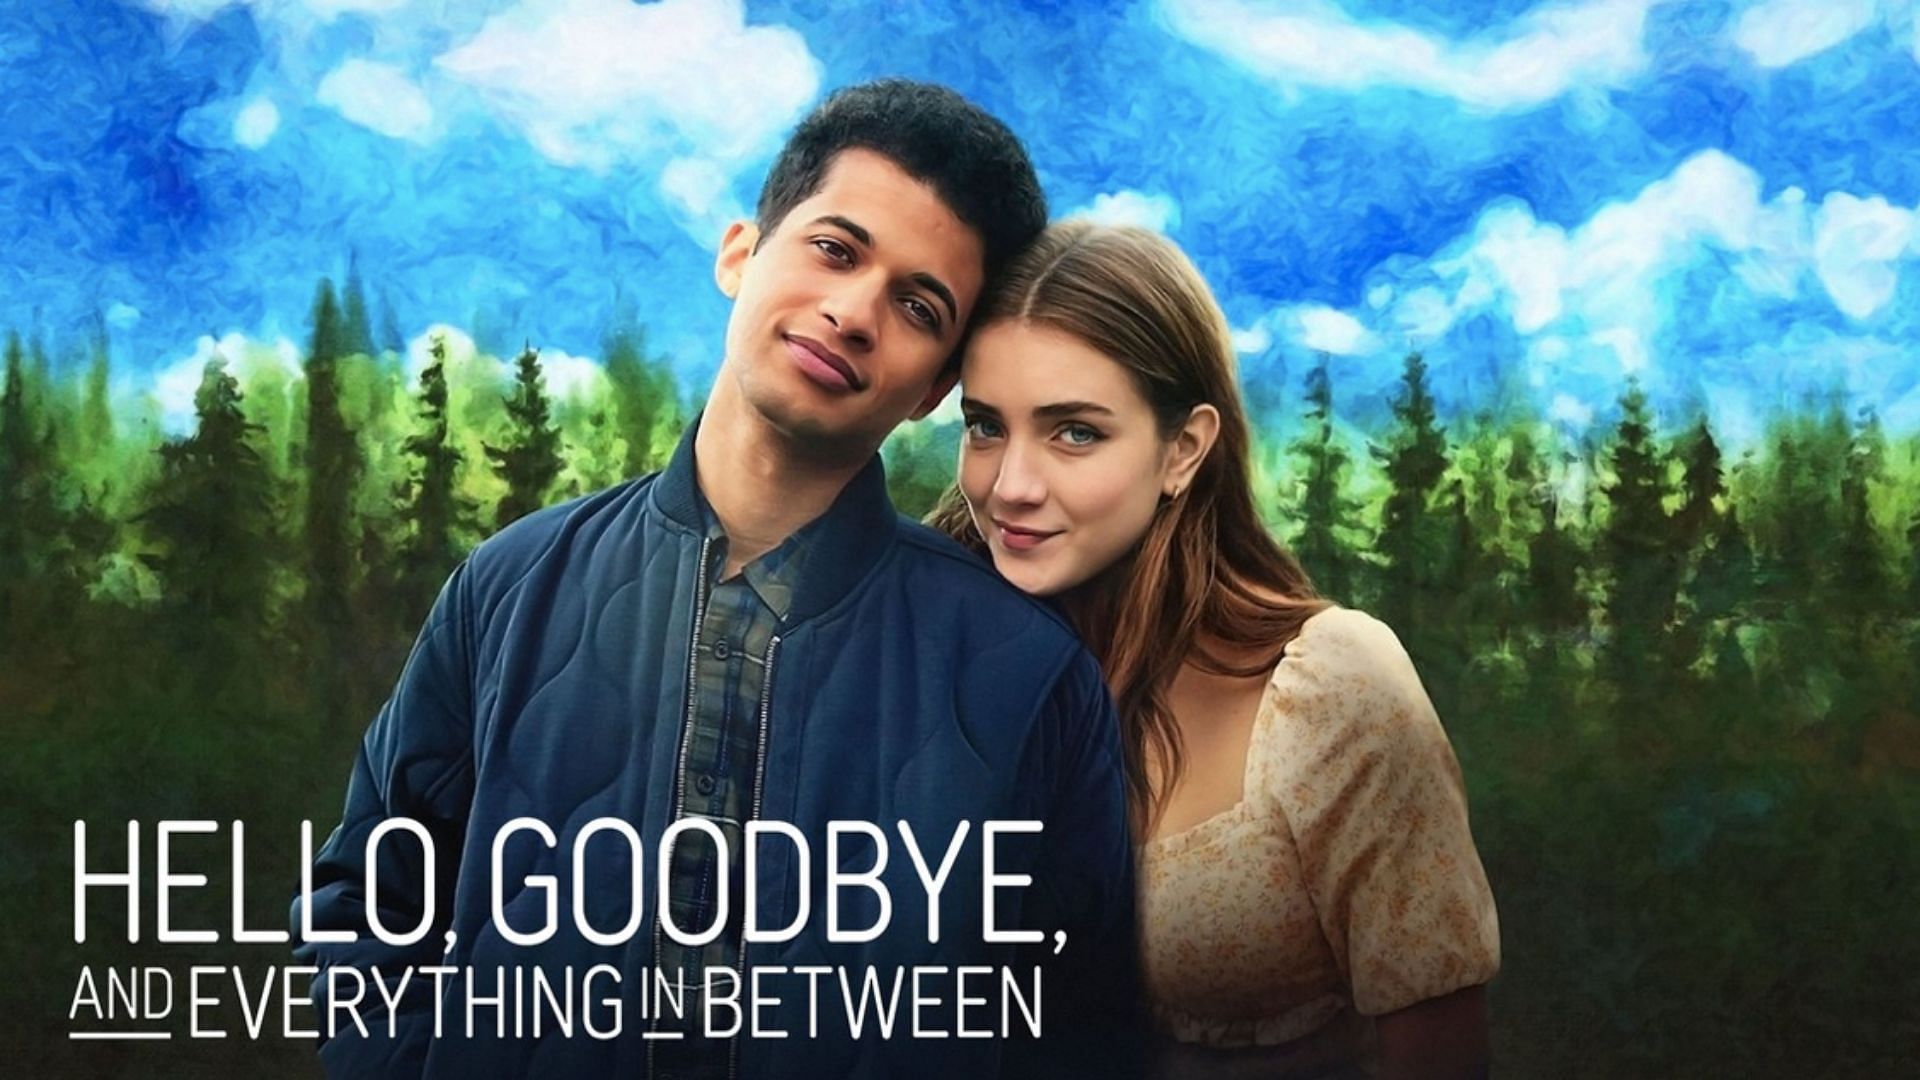 Hello, Goodbye, and Everything in Between (Image via Rotten Tomatoes)